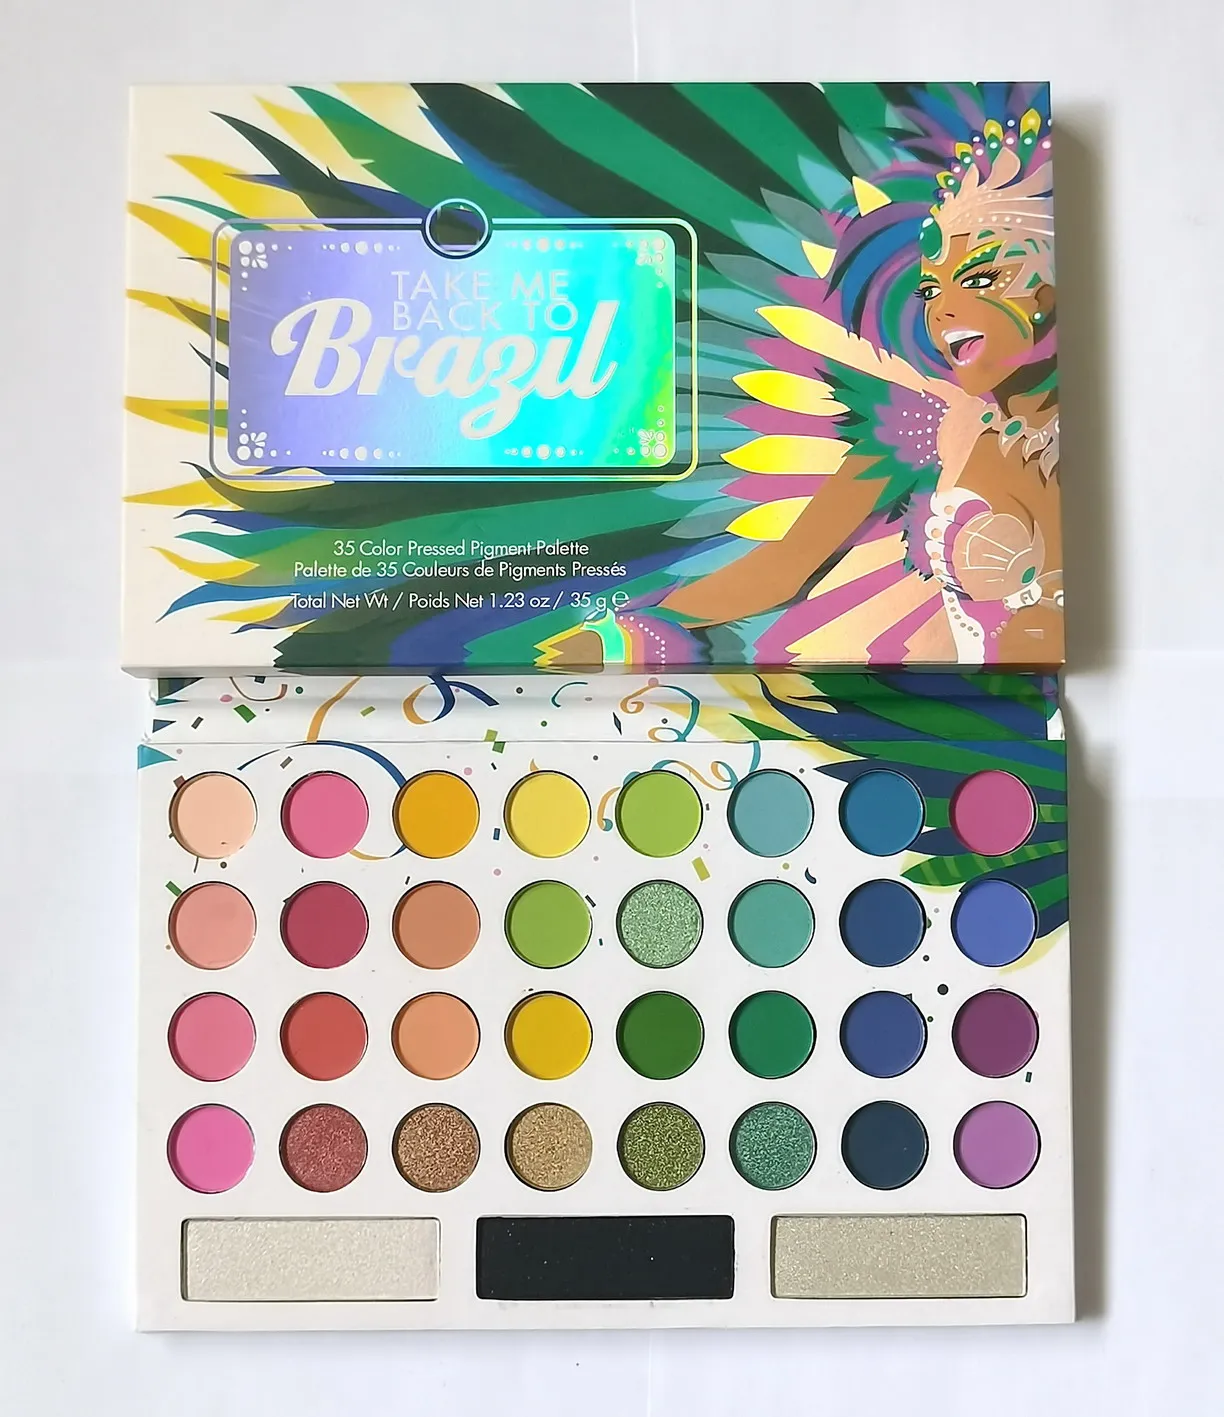 

HOT Makeup Take me Back to Brazil Palette 35 Colors Pressed Pigment Palette Nude Shimmer Matte Eyeshadow Cosmetic DHL shipping